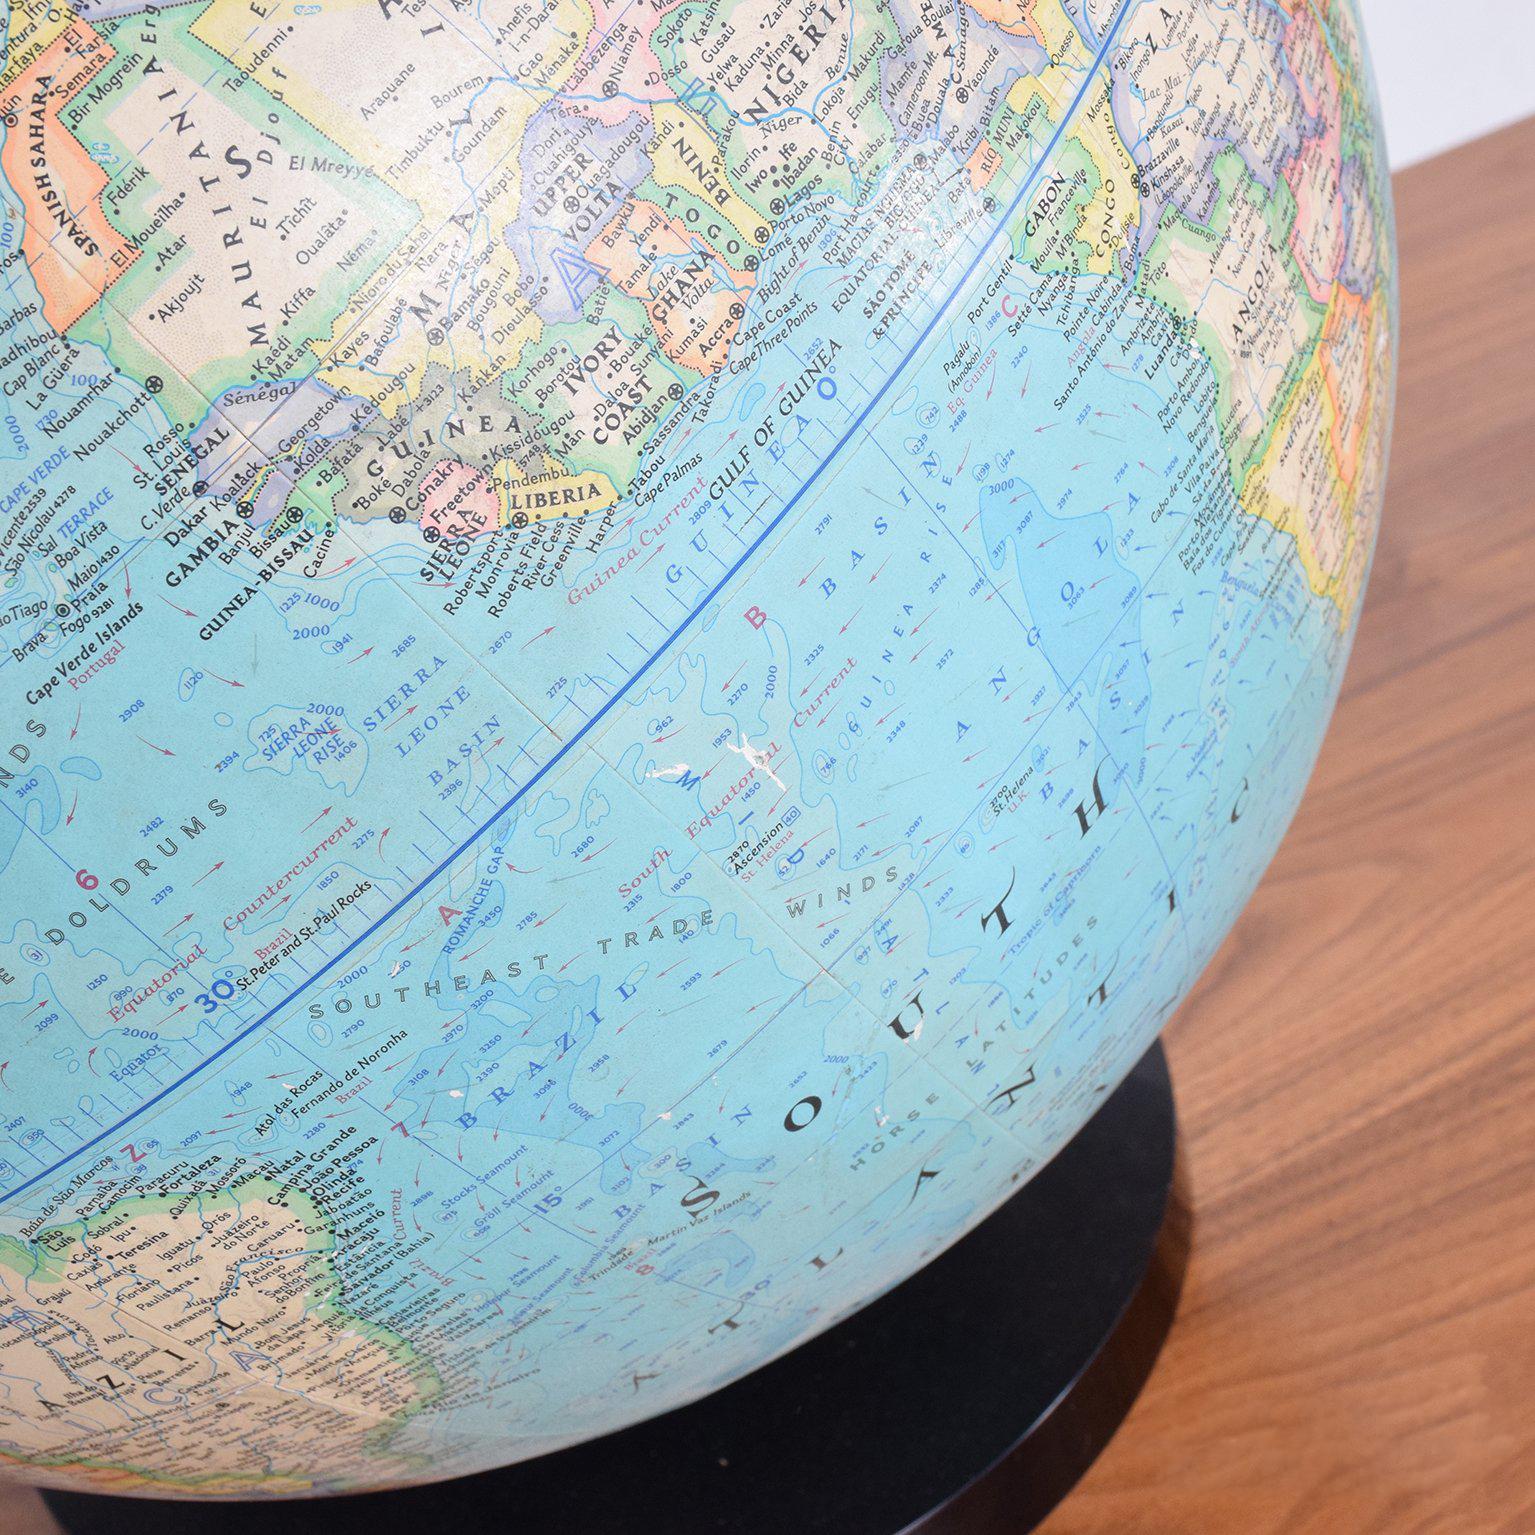 For your consideration a vintage world globe by National Geographic. 
Mounted in sleek modern black plastic round base with an aluminum stem. 

Measures: 17